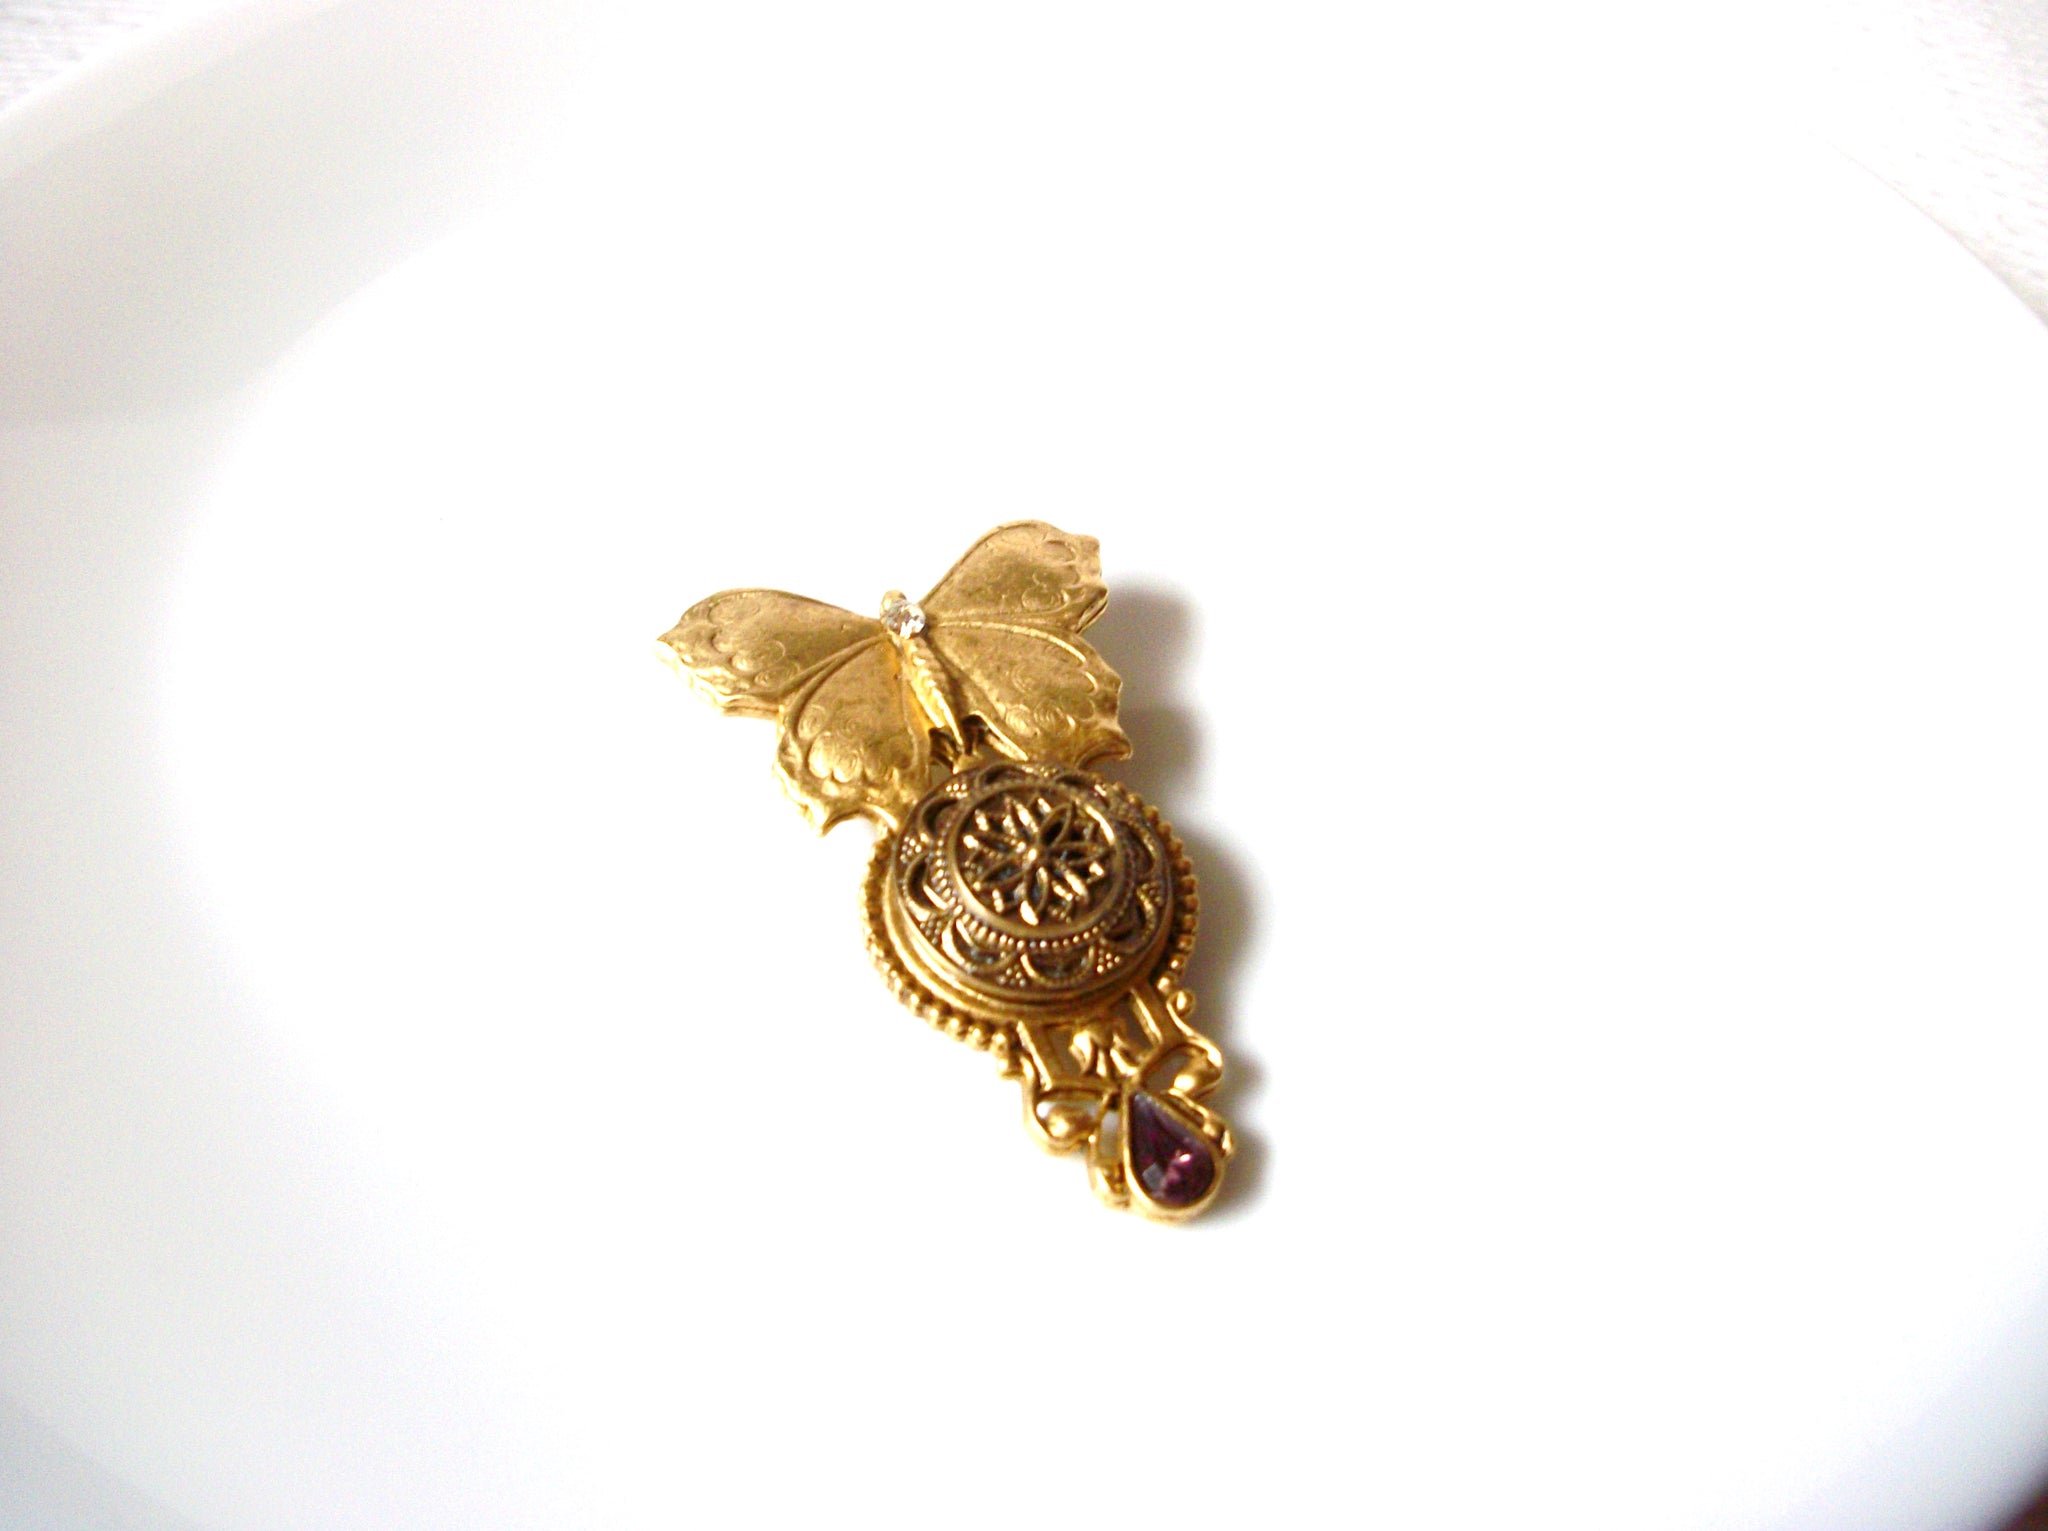 Vintage Victorian Romantic Butterfly Brooch Pin 121920